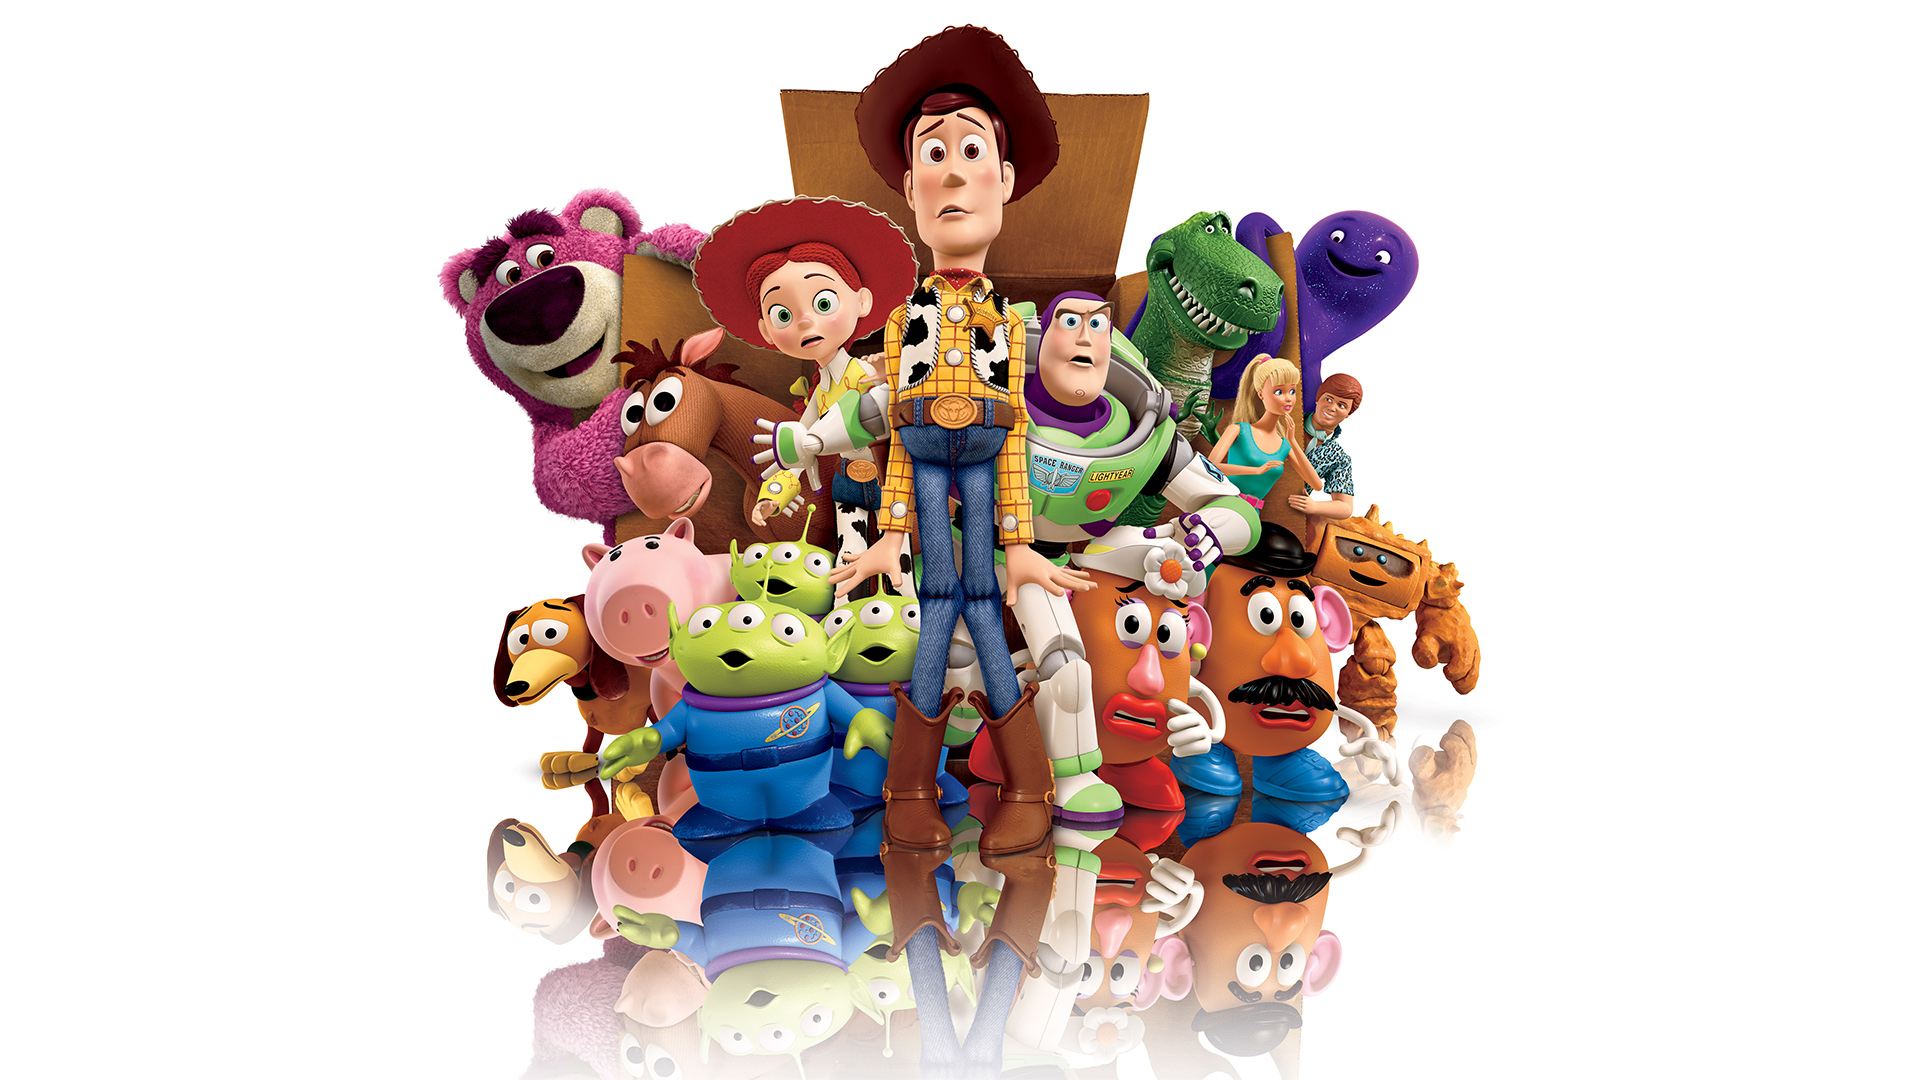 toy story, movie, toy story 3 lock screen backgrounds